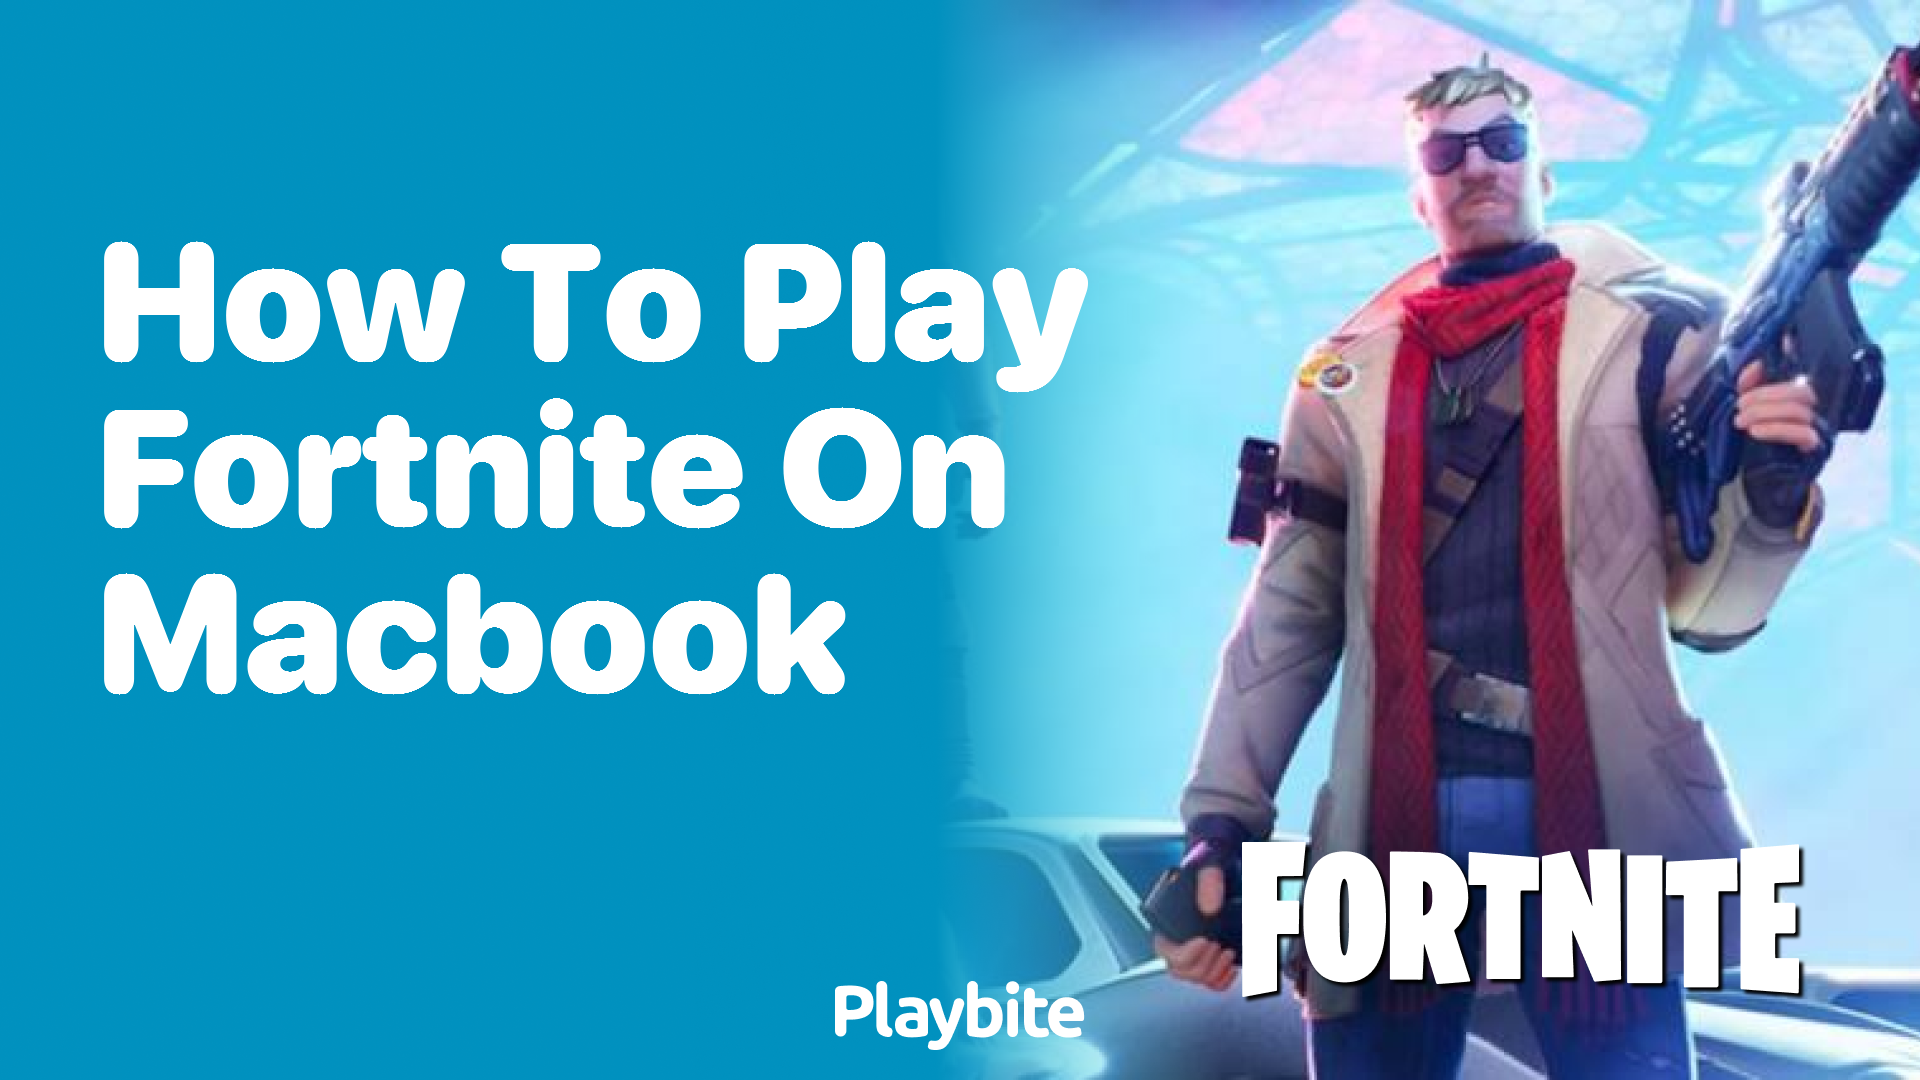 How to Play Fortnite on MacBook